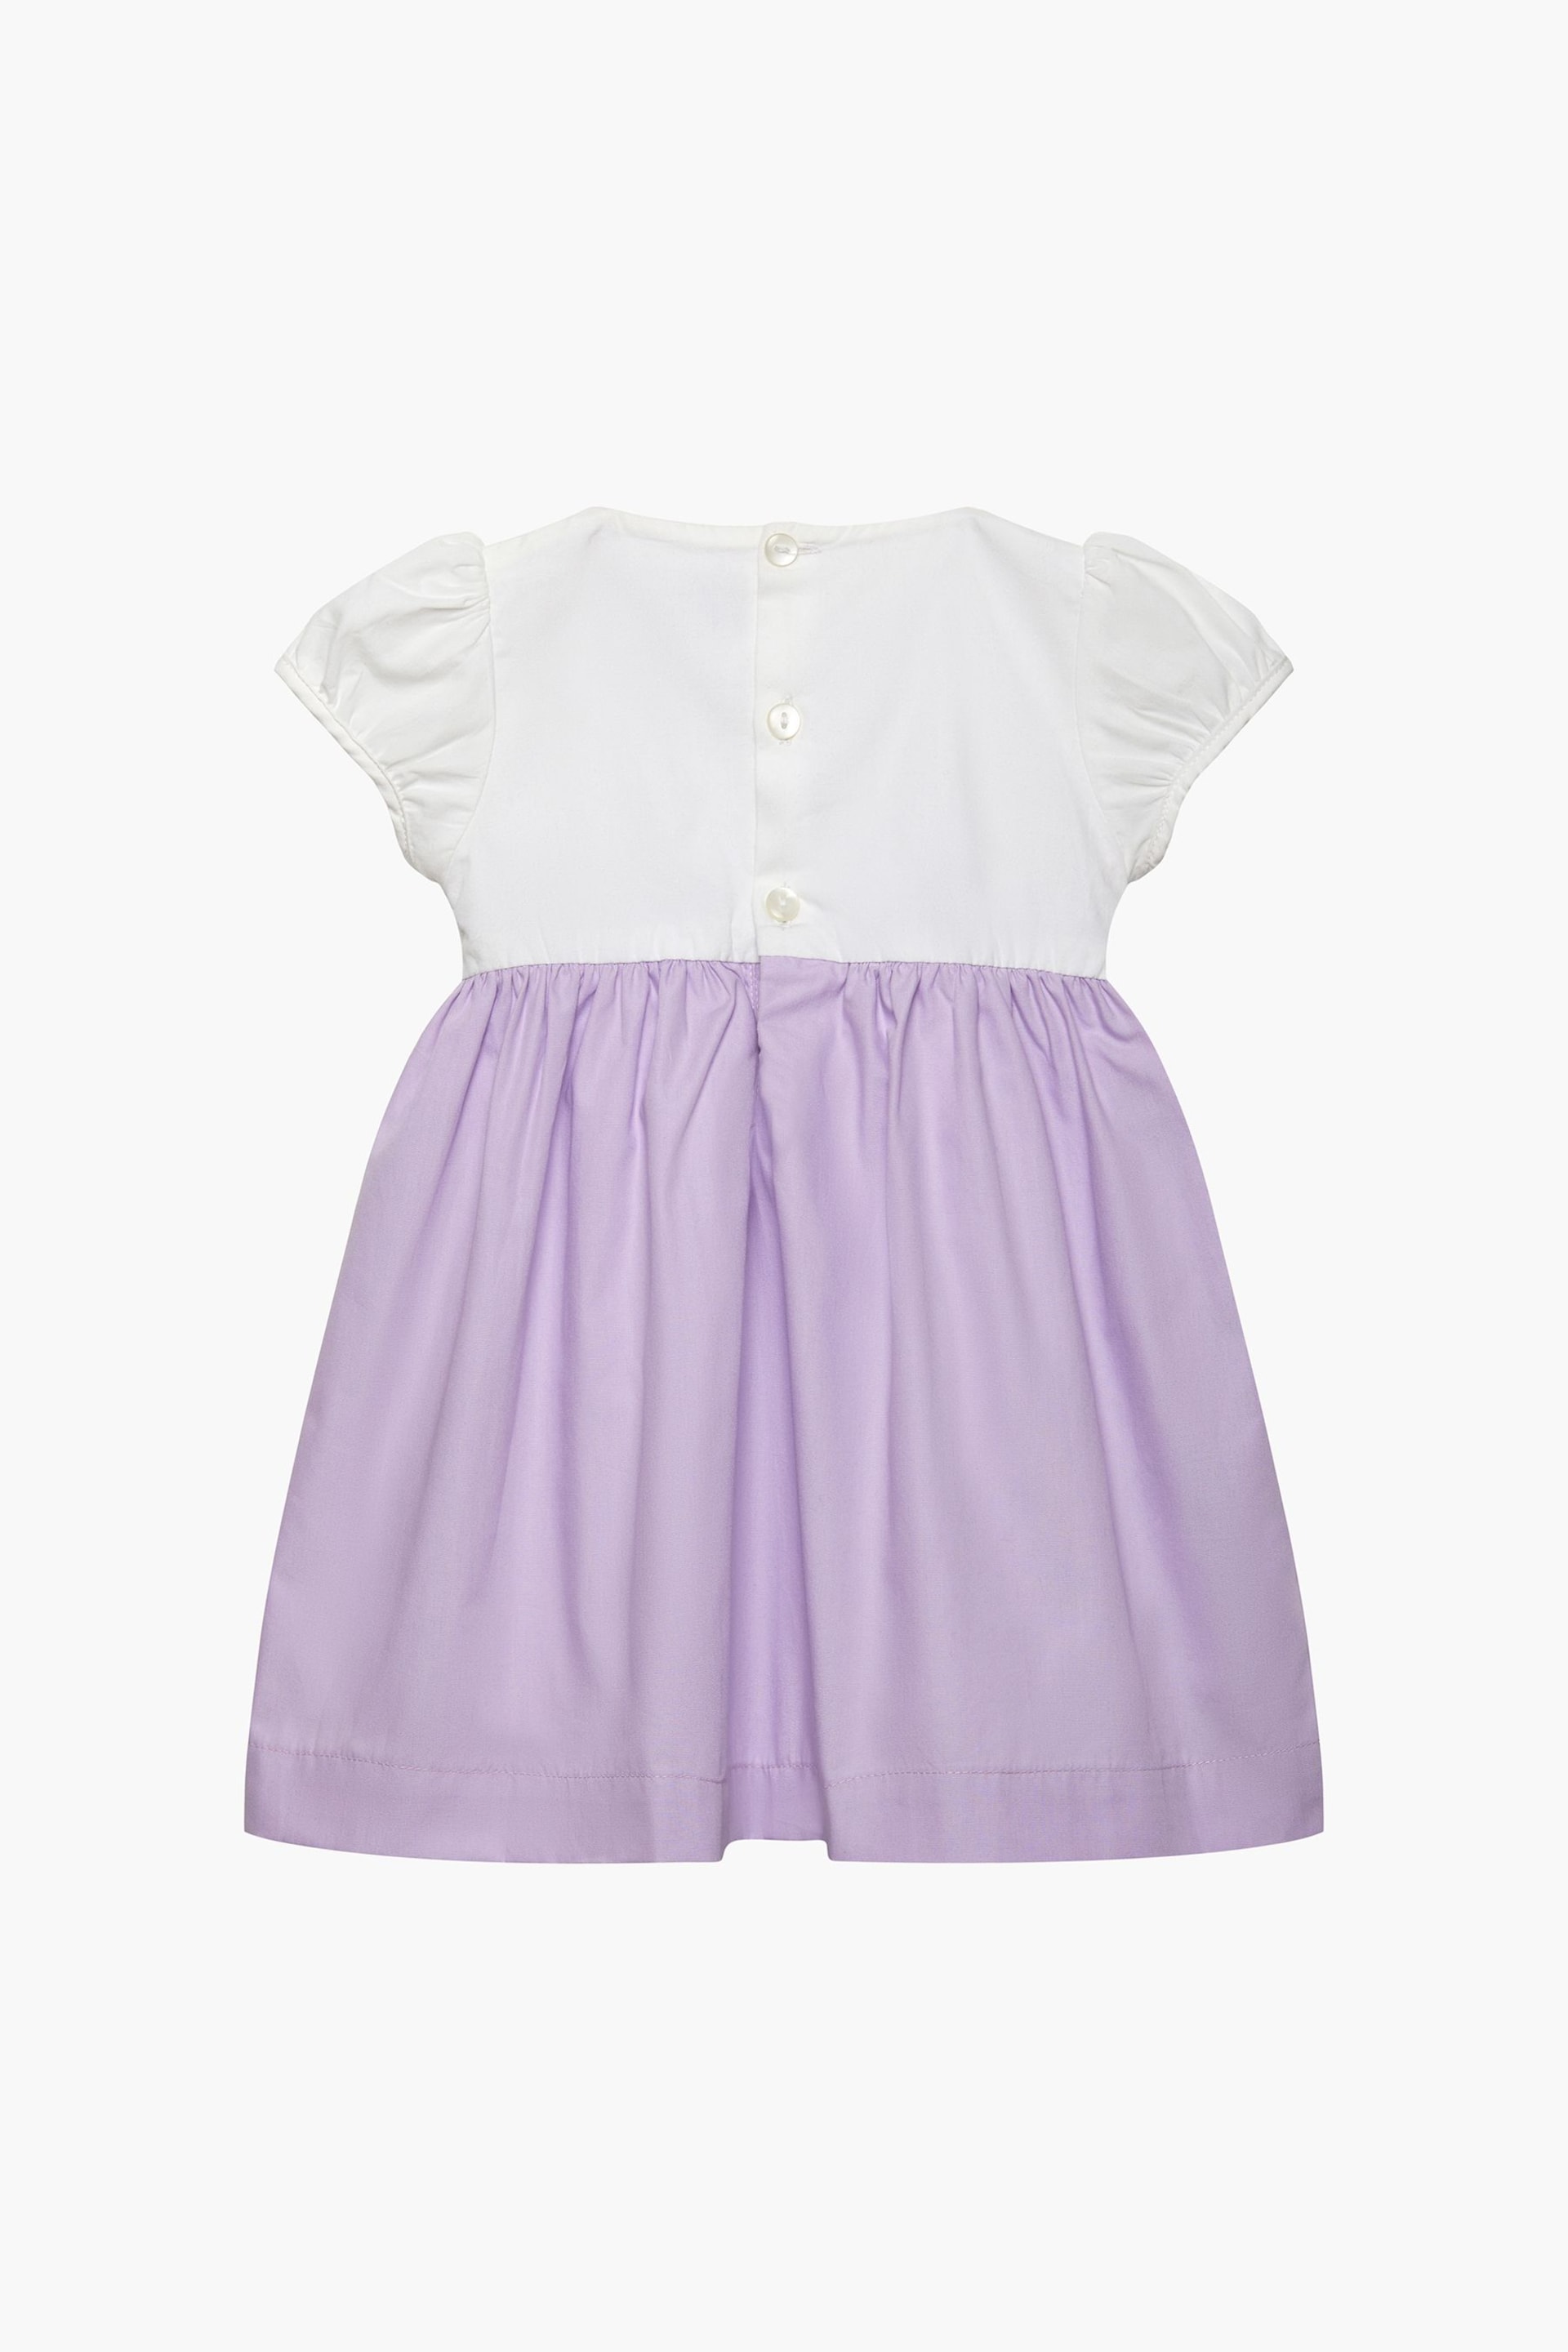 Trotters London Purple Little Rose Hand Smocked Cotton Dress - Image 3 of 4